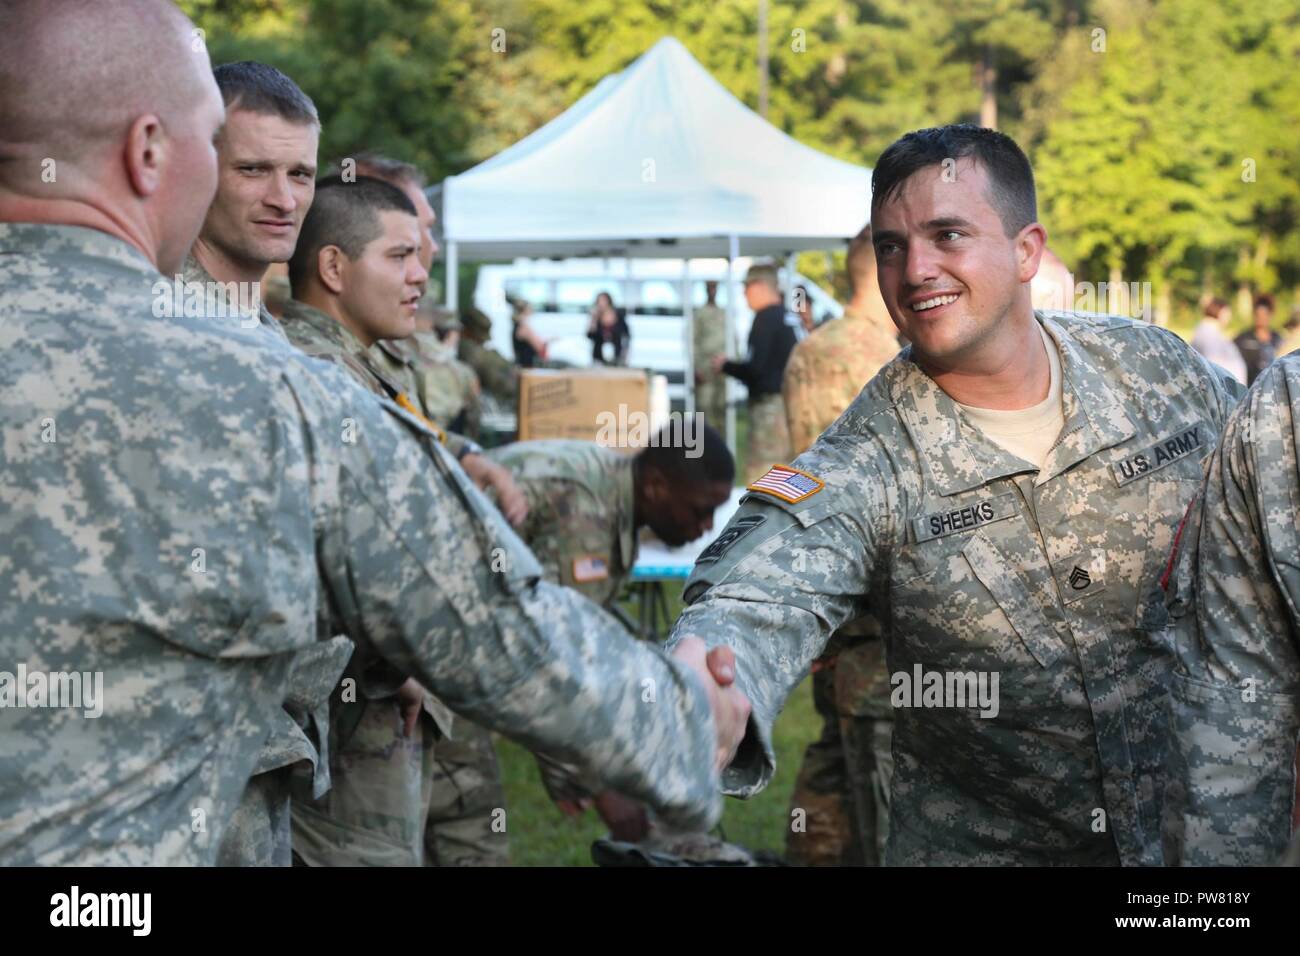 U.S. Army Staff Sgt. Tyler Sheeks, assigned to the Keller Army Community Hospital, shakes hands with fellow competitor Capt. Jeremy Lewis after the 2017 Best Medic Competition at Fort Bragg, N.C., Sept. 20, 2017. The competition tested the physical and mental toughness, as well as the technical competence, of each medic to identify the team moving forward to represent the region at the next level of the competition. Stock Photo